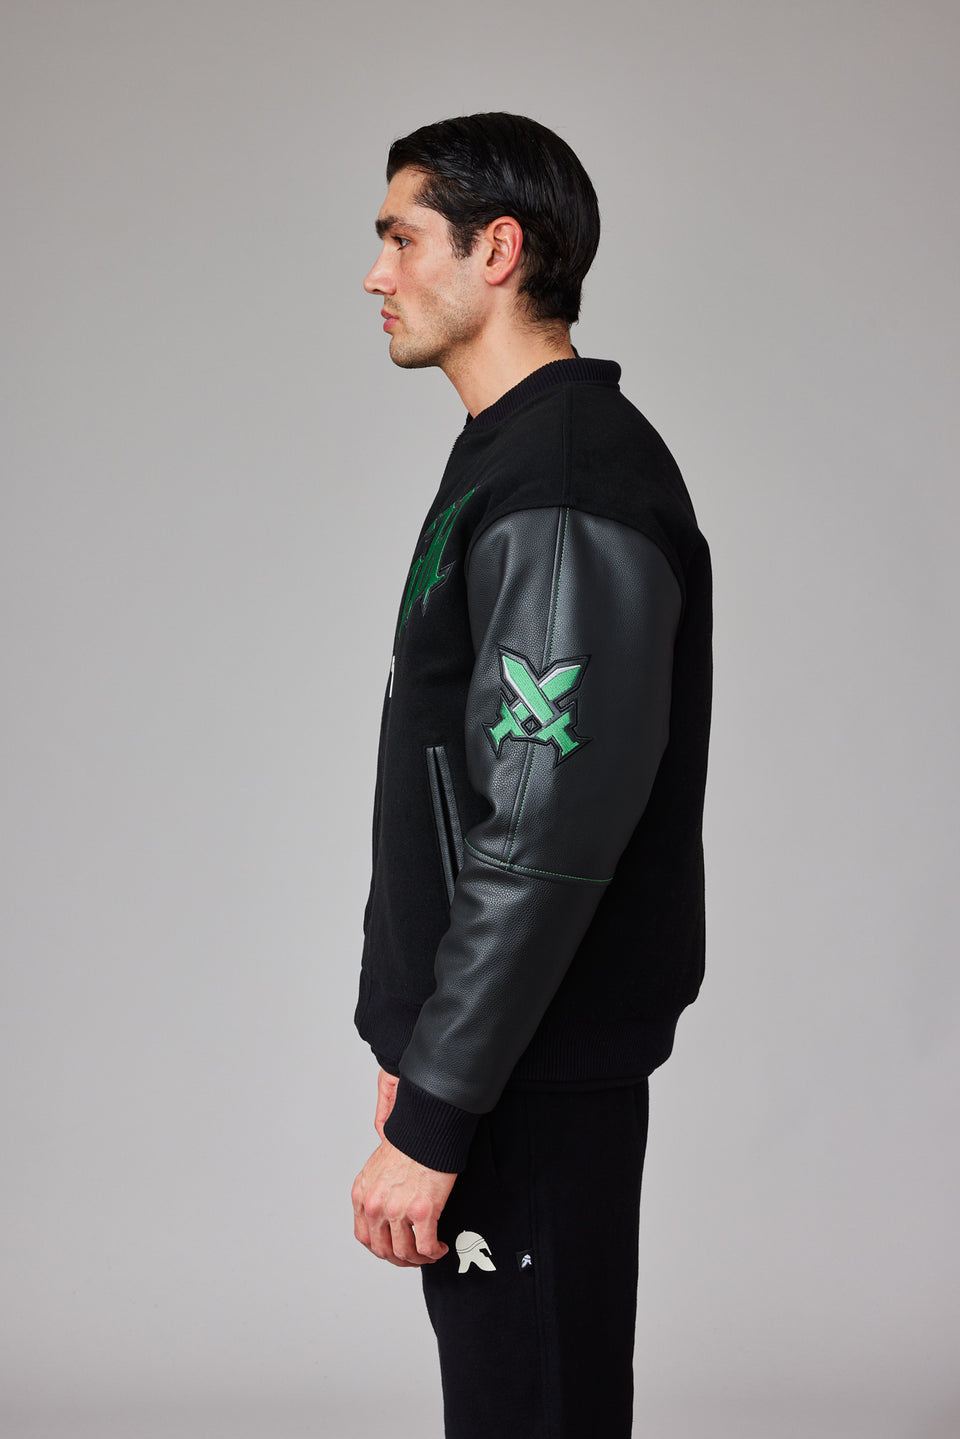 Illyrian Troops College Jacket